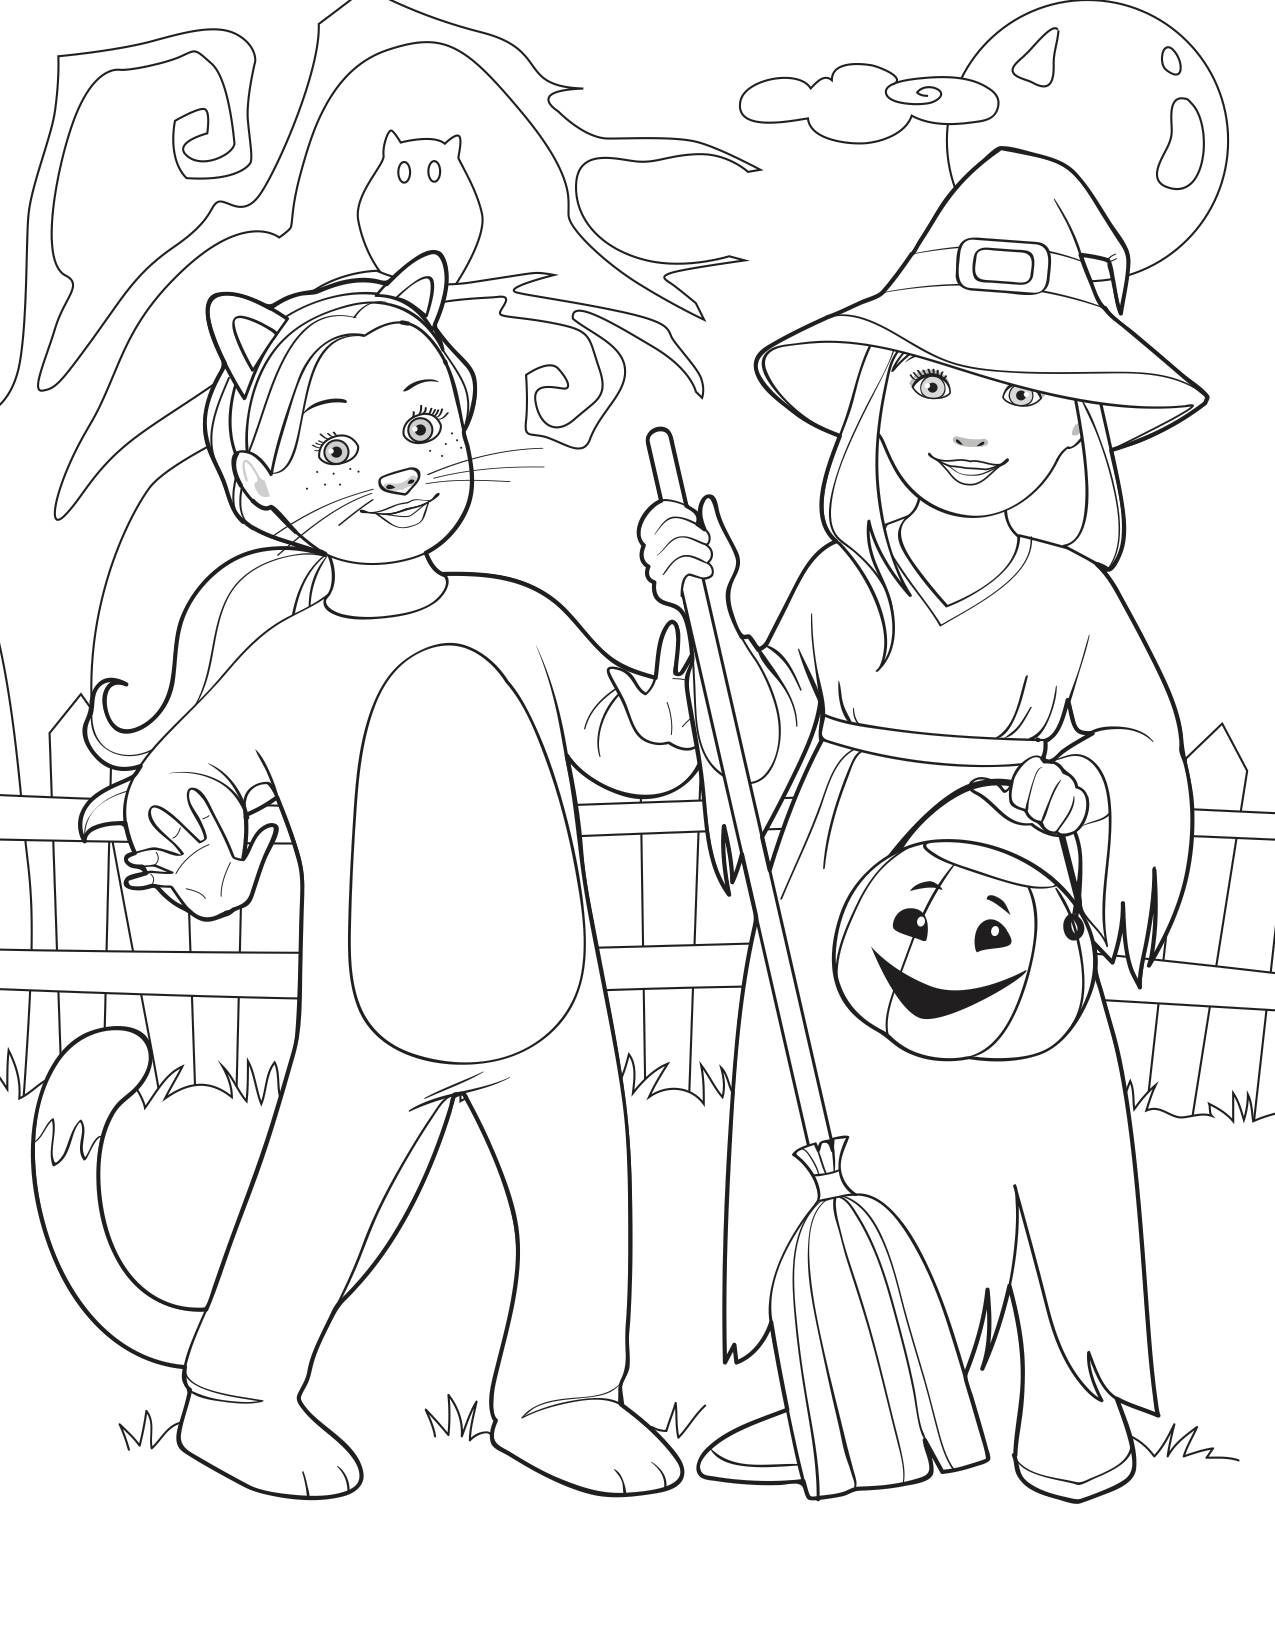 American Girl Coloring Pages - Best Coloring Pages For Kids